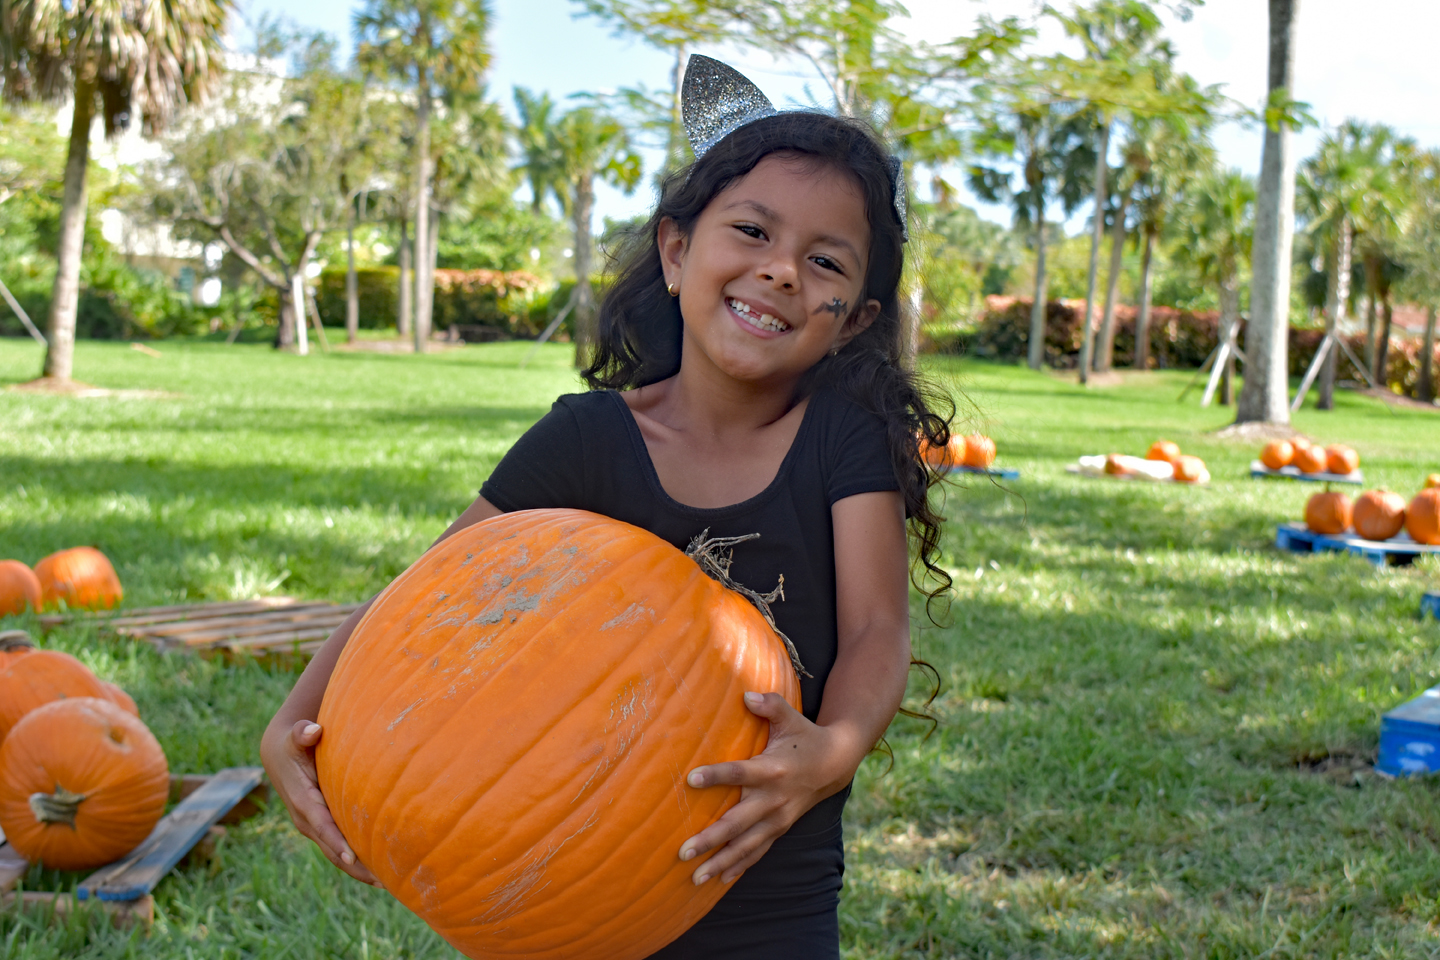 Broward Health Coral Springs Holds Free 'Pumpkin Patch Family Fun Day'